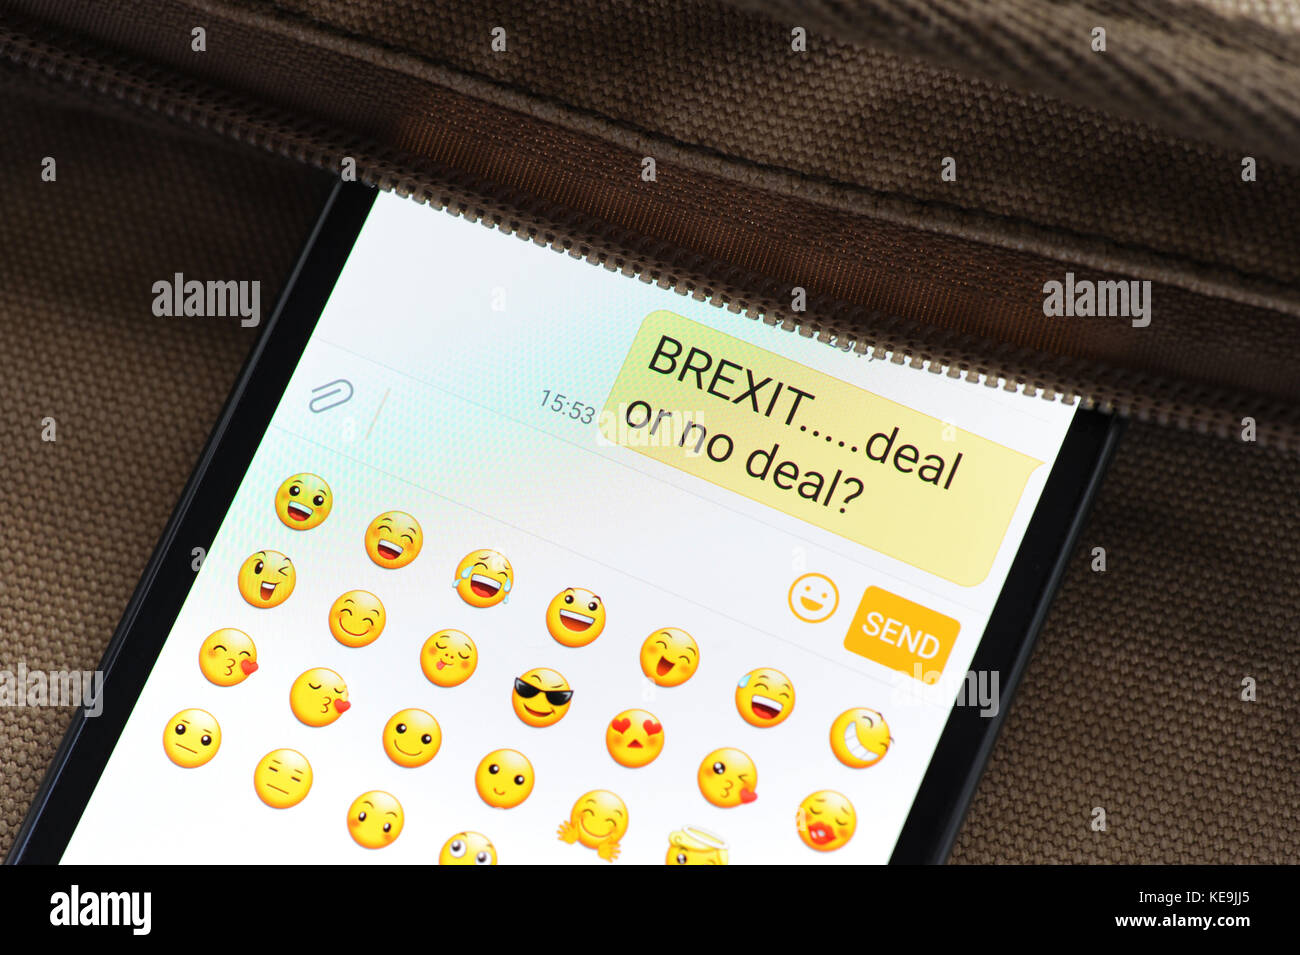 BREXIT MESSAGE ON SMARTPHONE RE LEAVING THE EUROPEAN UNION DEAL OR NO DEAL REMOANERS   BREXITEERS THE EU UK EMOJIS Stock Photo